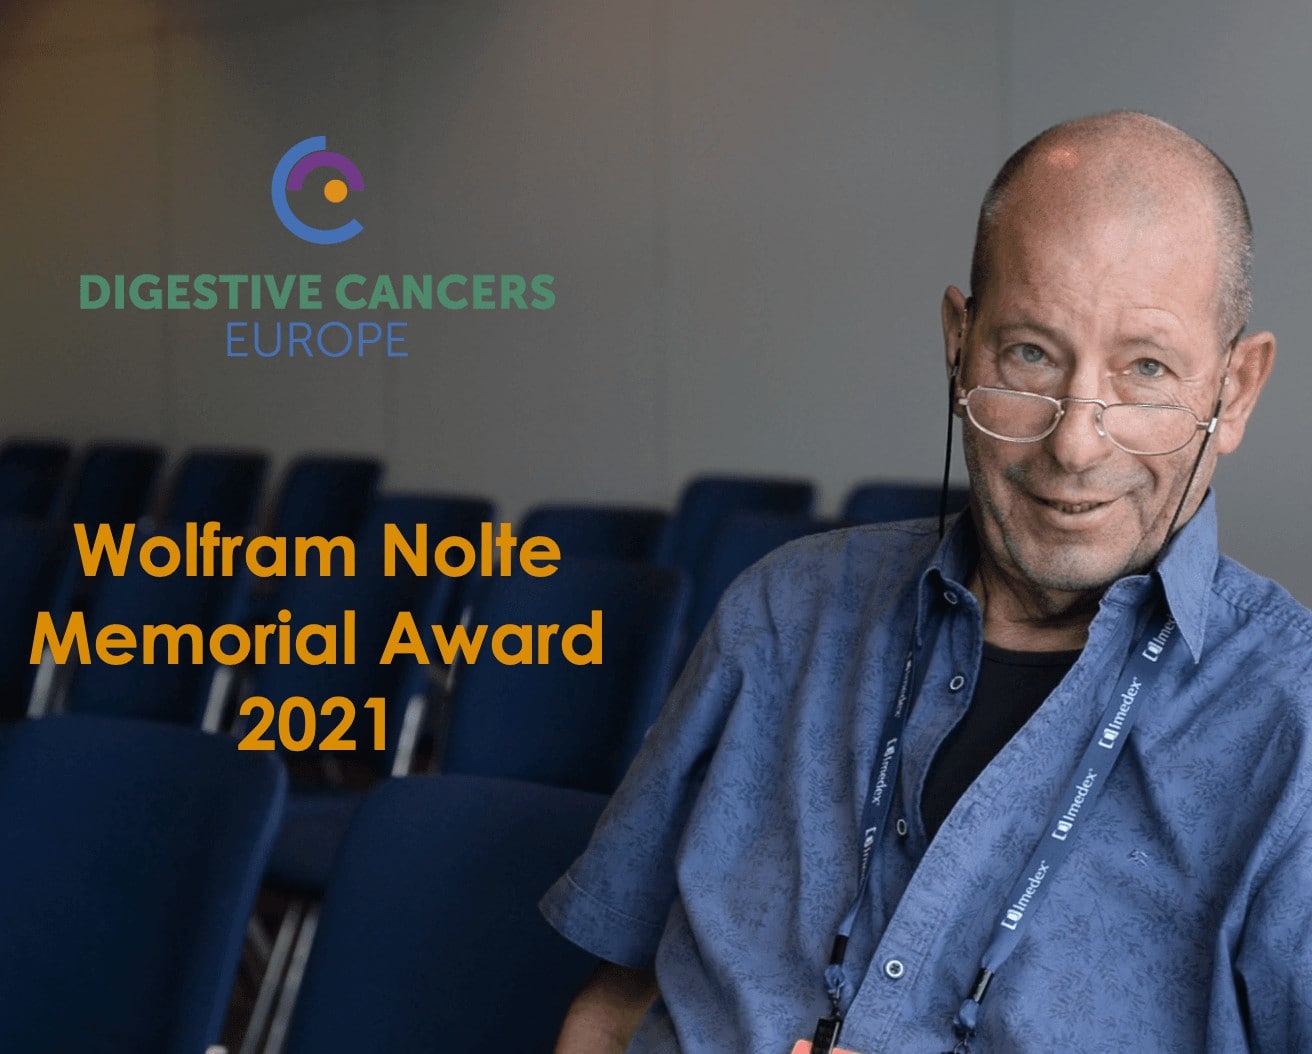 We Have a Winner! Results of the Wolfram Nolte Memorial Award